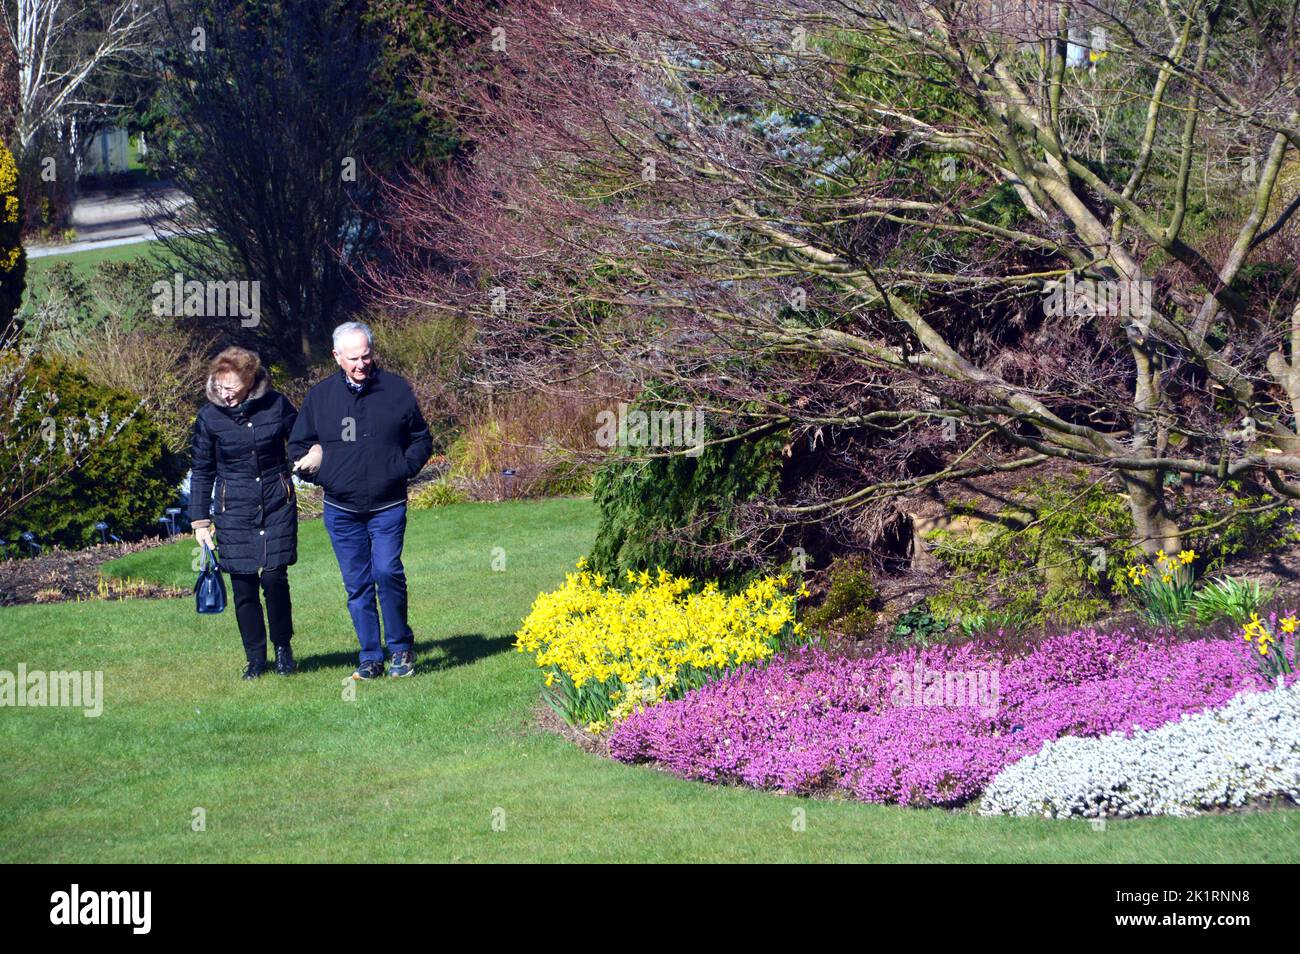 Elderly Couple Walking on Grass by Border of Purple Heather & Bunches of Yellow Daffodils at RHS Harlow Carr, Harrogate, Yorkshire, England, UK. Stock Photo